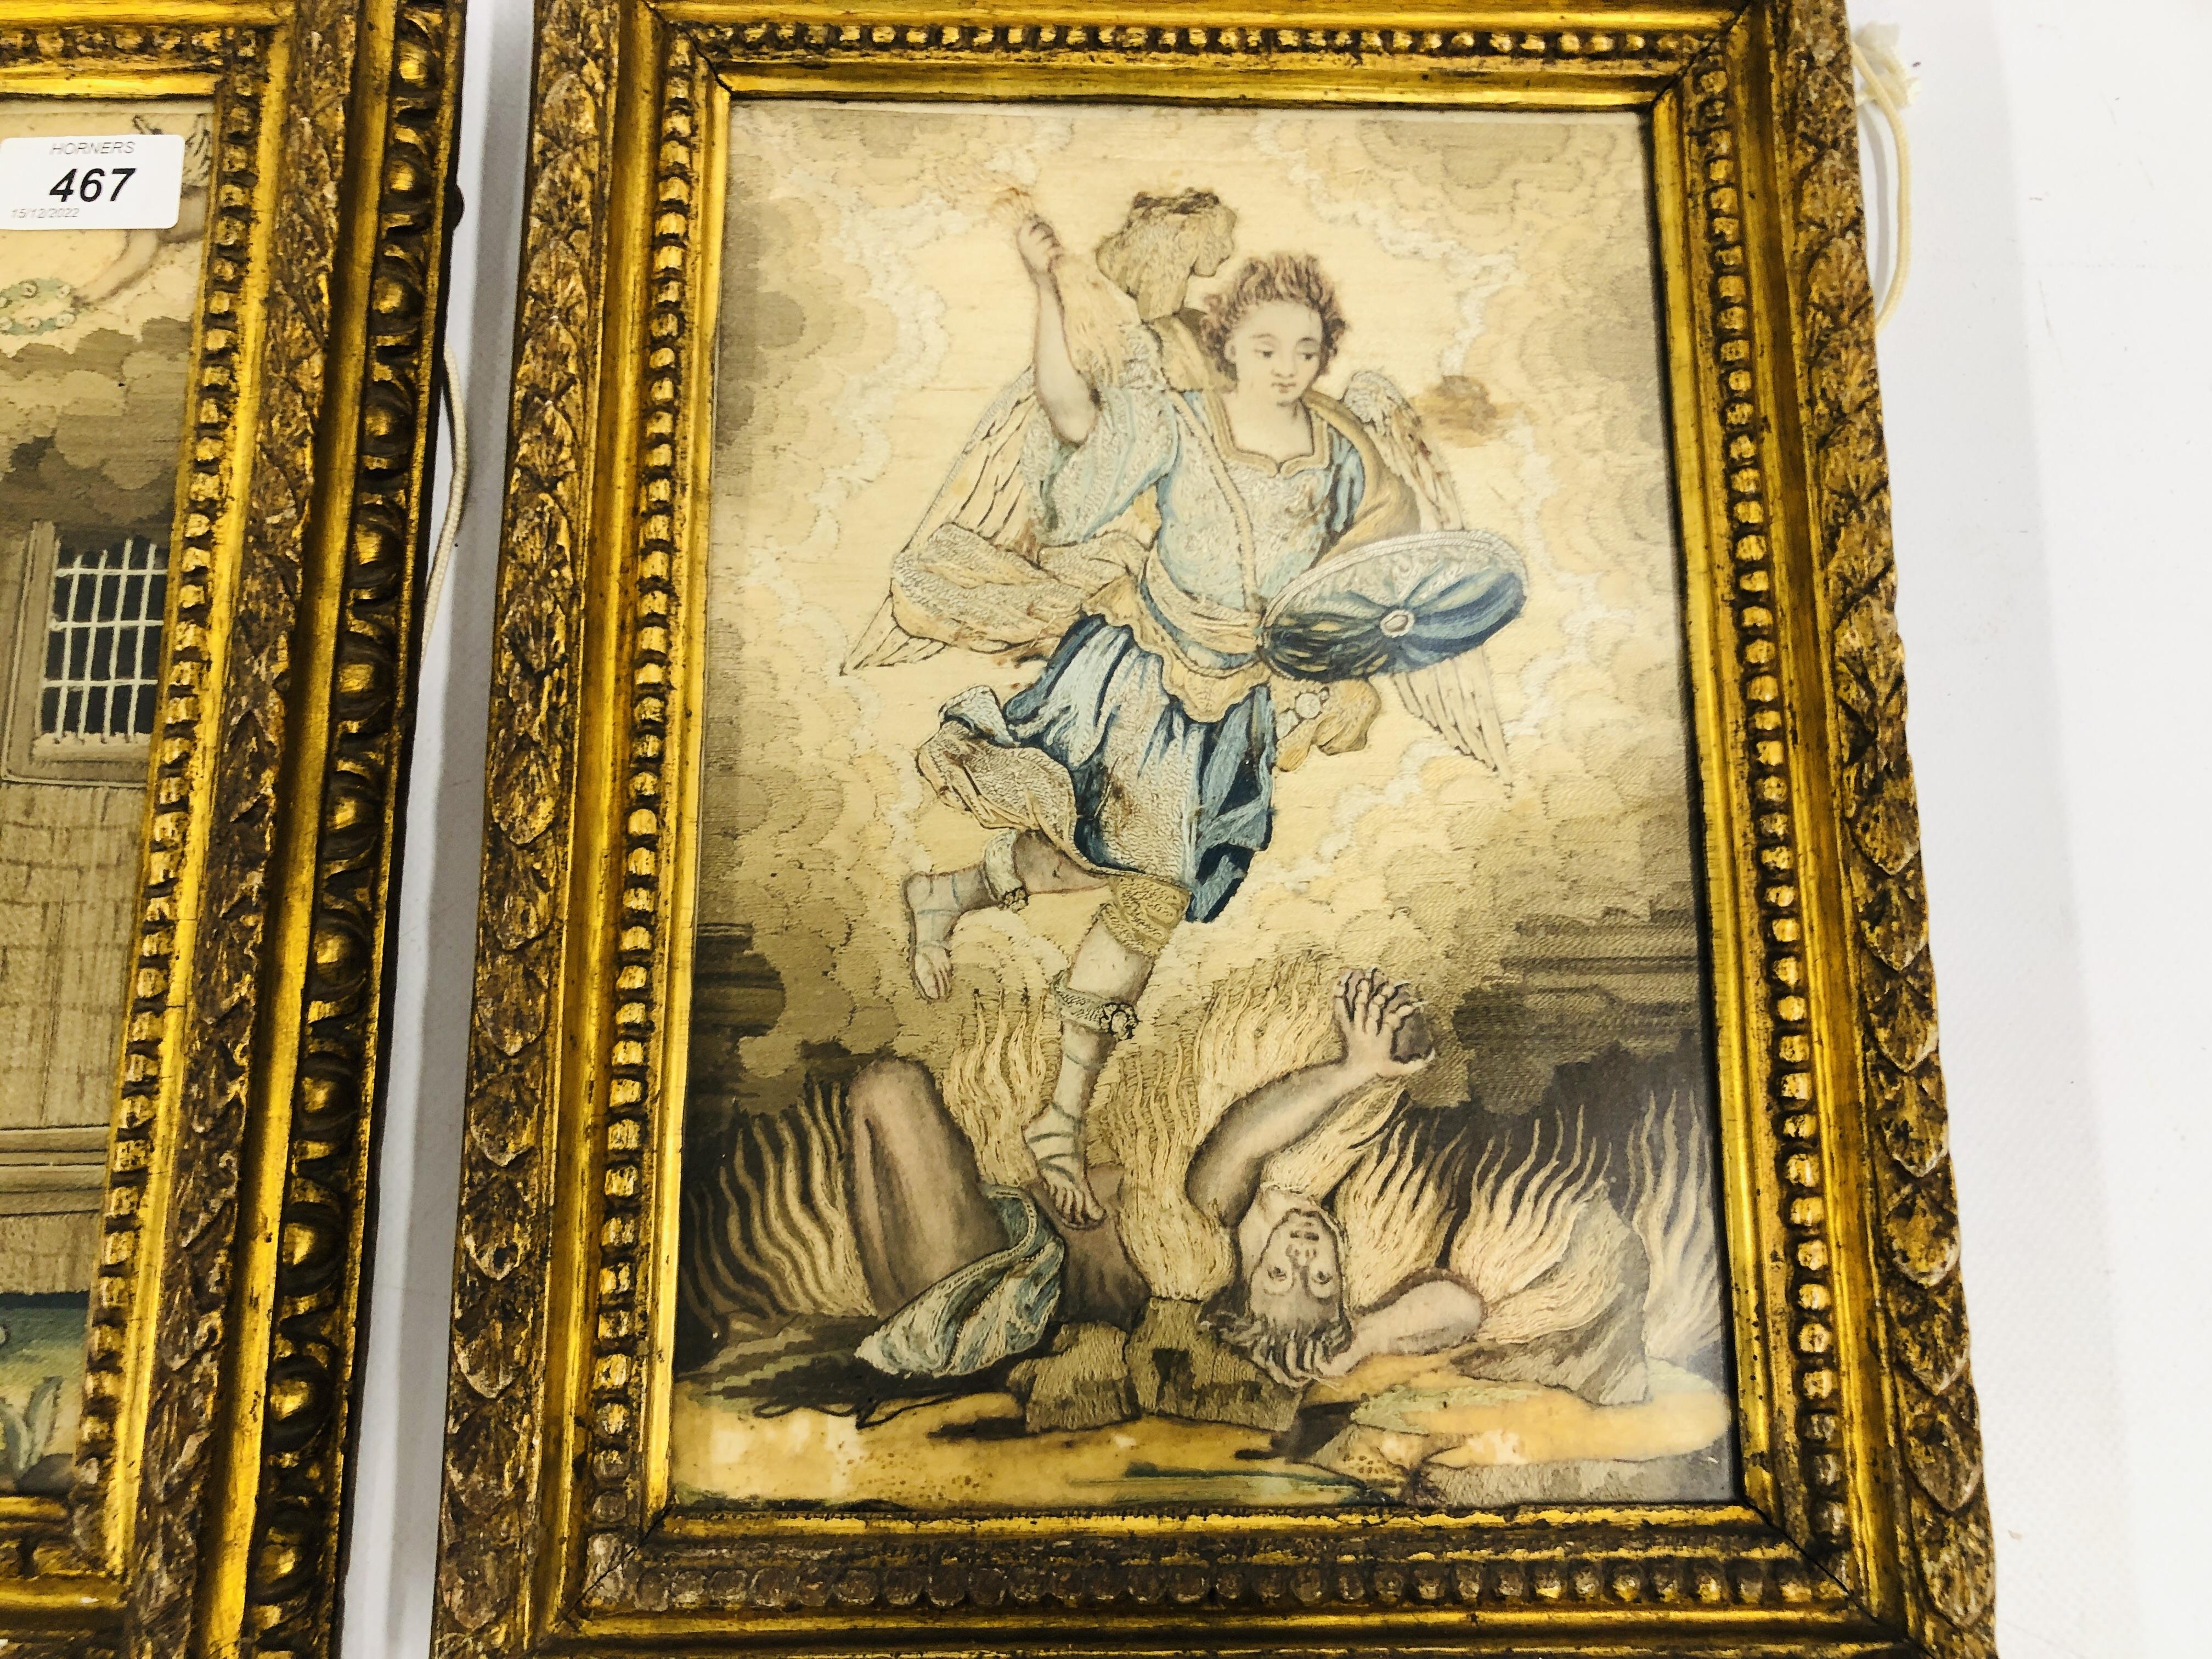 A PAIR OF SILK EMBROIDERIES CIRCA 1700; EXECUTION OF A SAINT (St. - Image 3 of 4